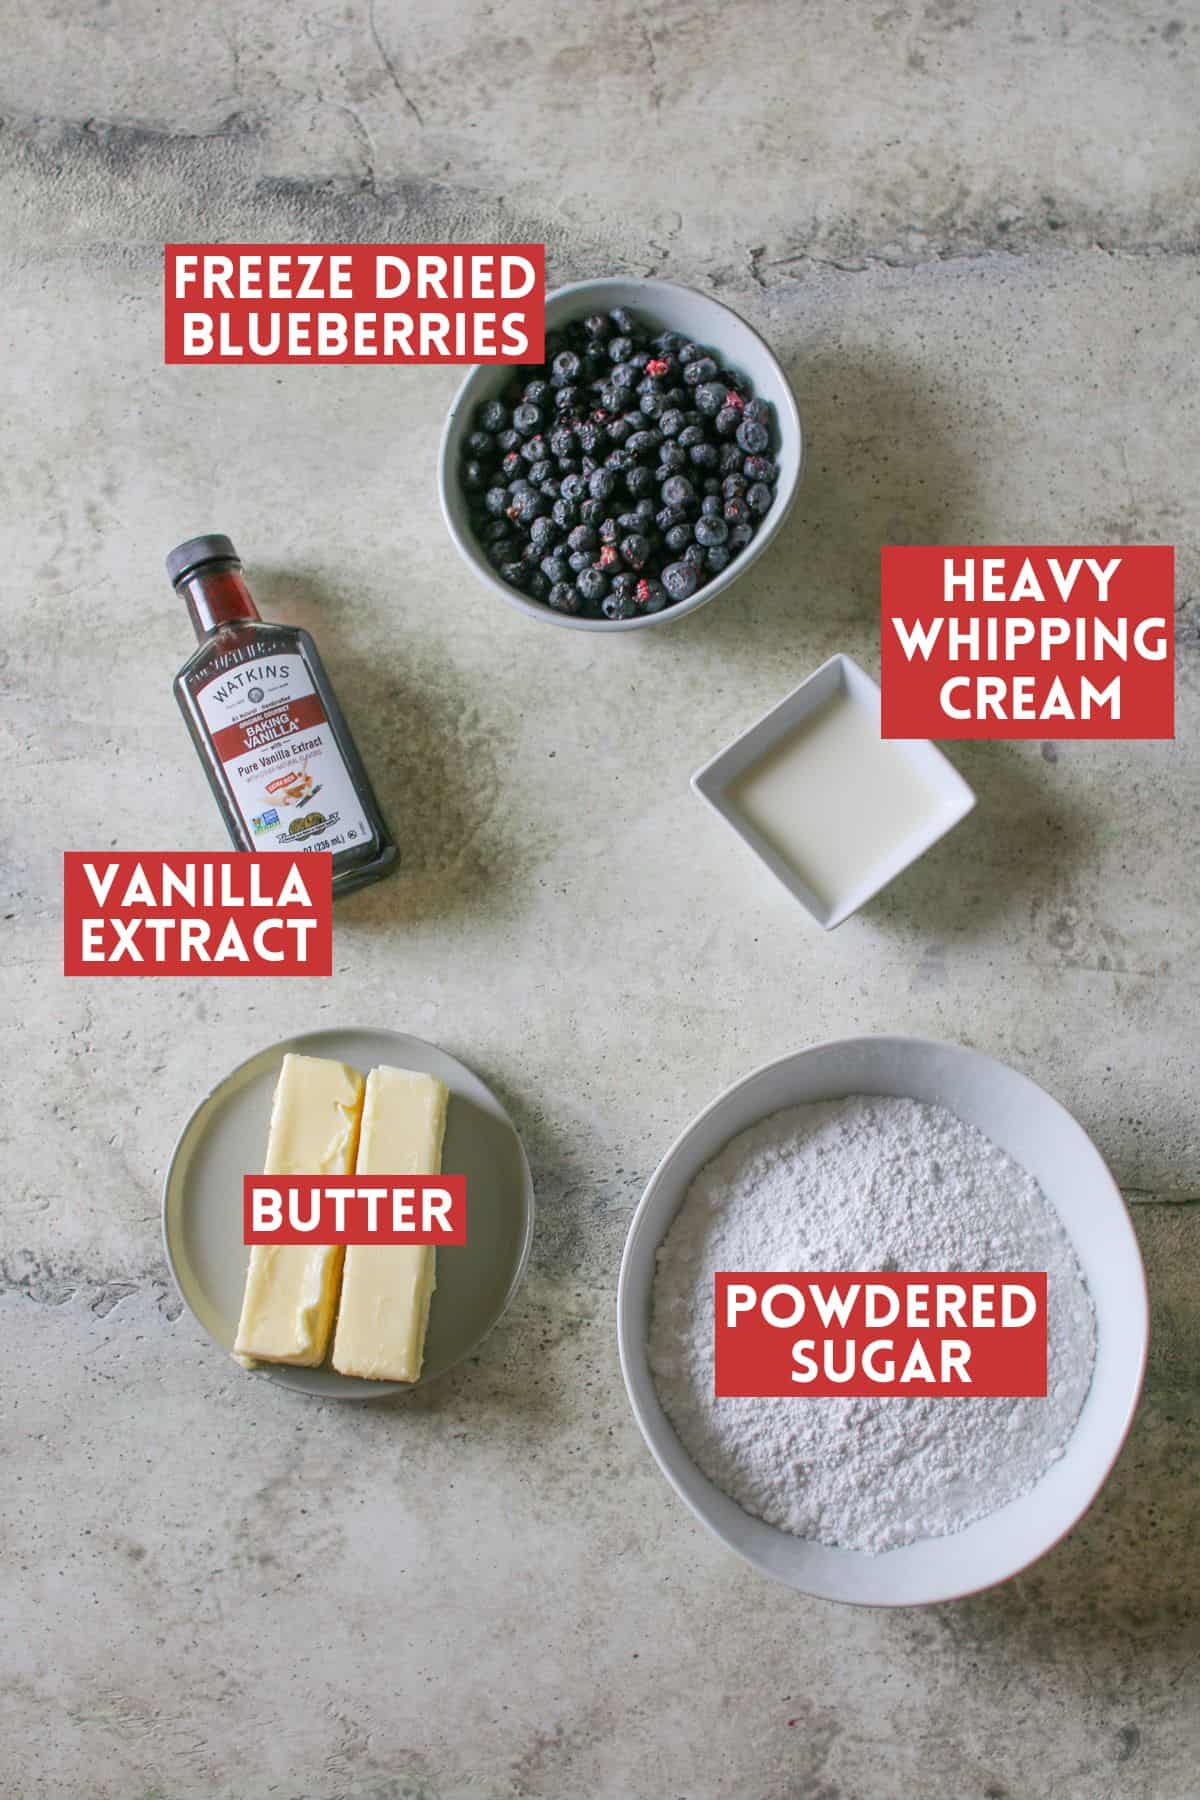 Blueberry Buttercream ingredients on a cement background. Each ingredient is labeled with a dark red rectangle with white text in all caps.